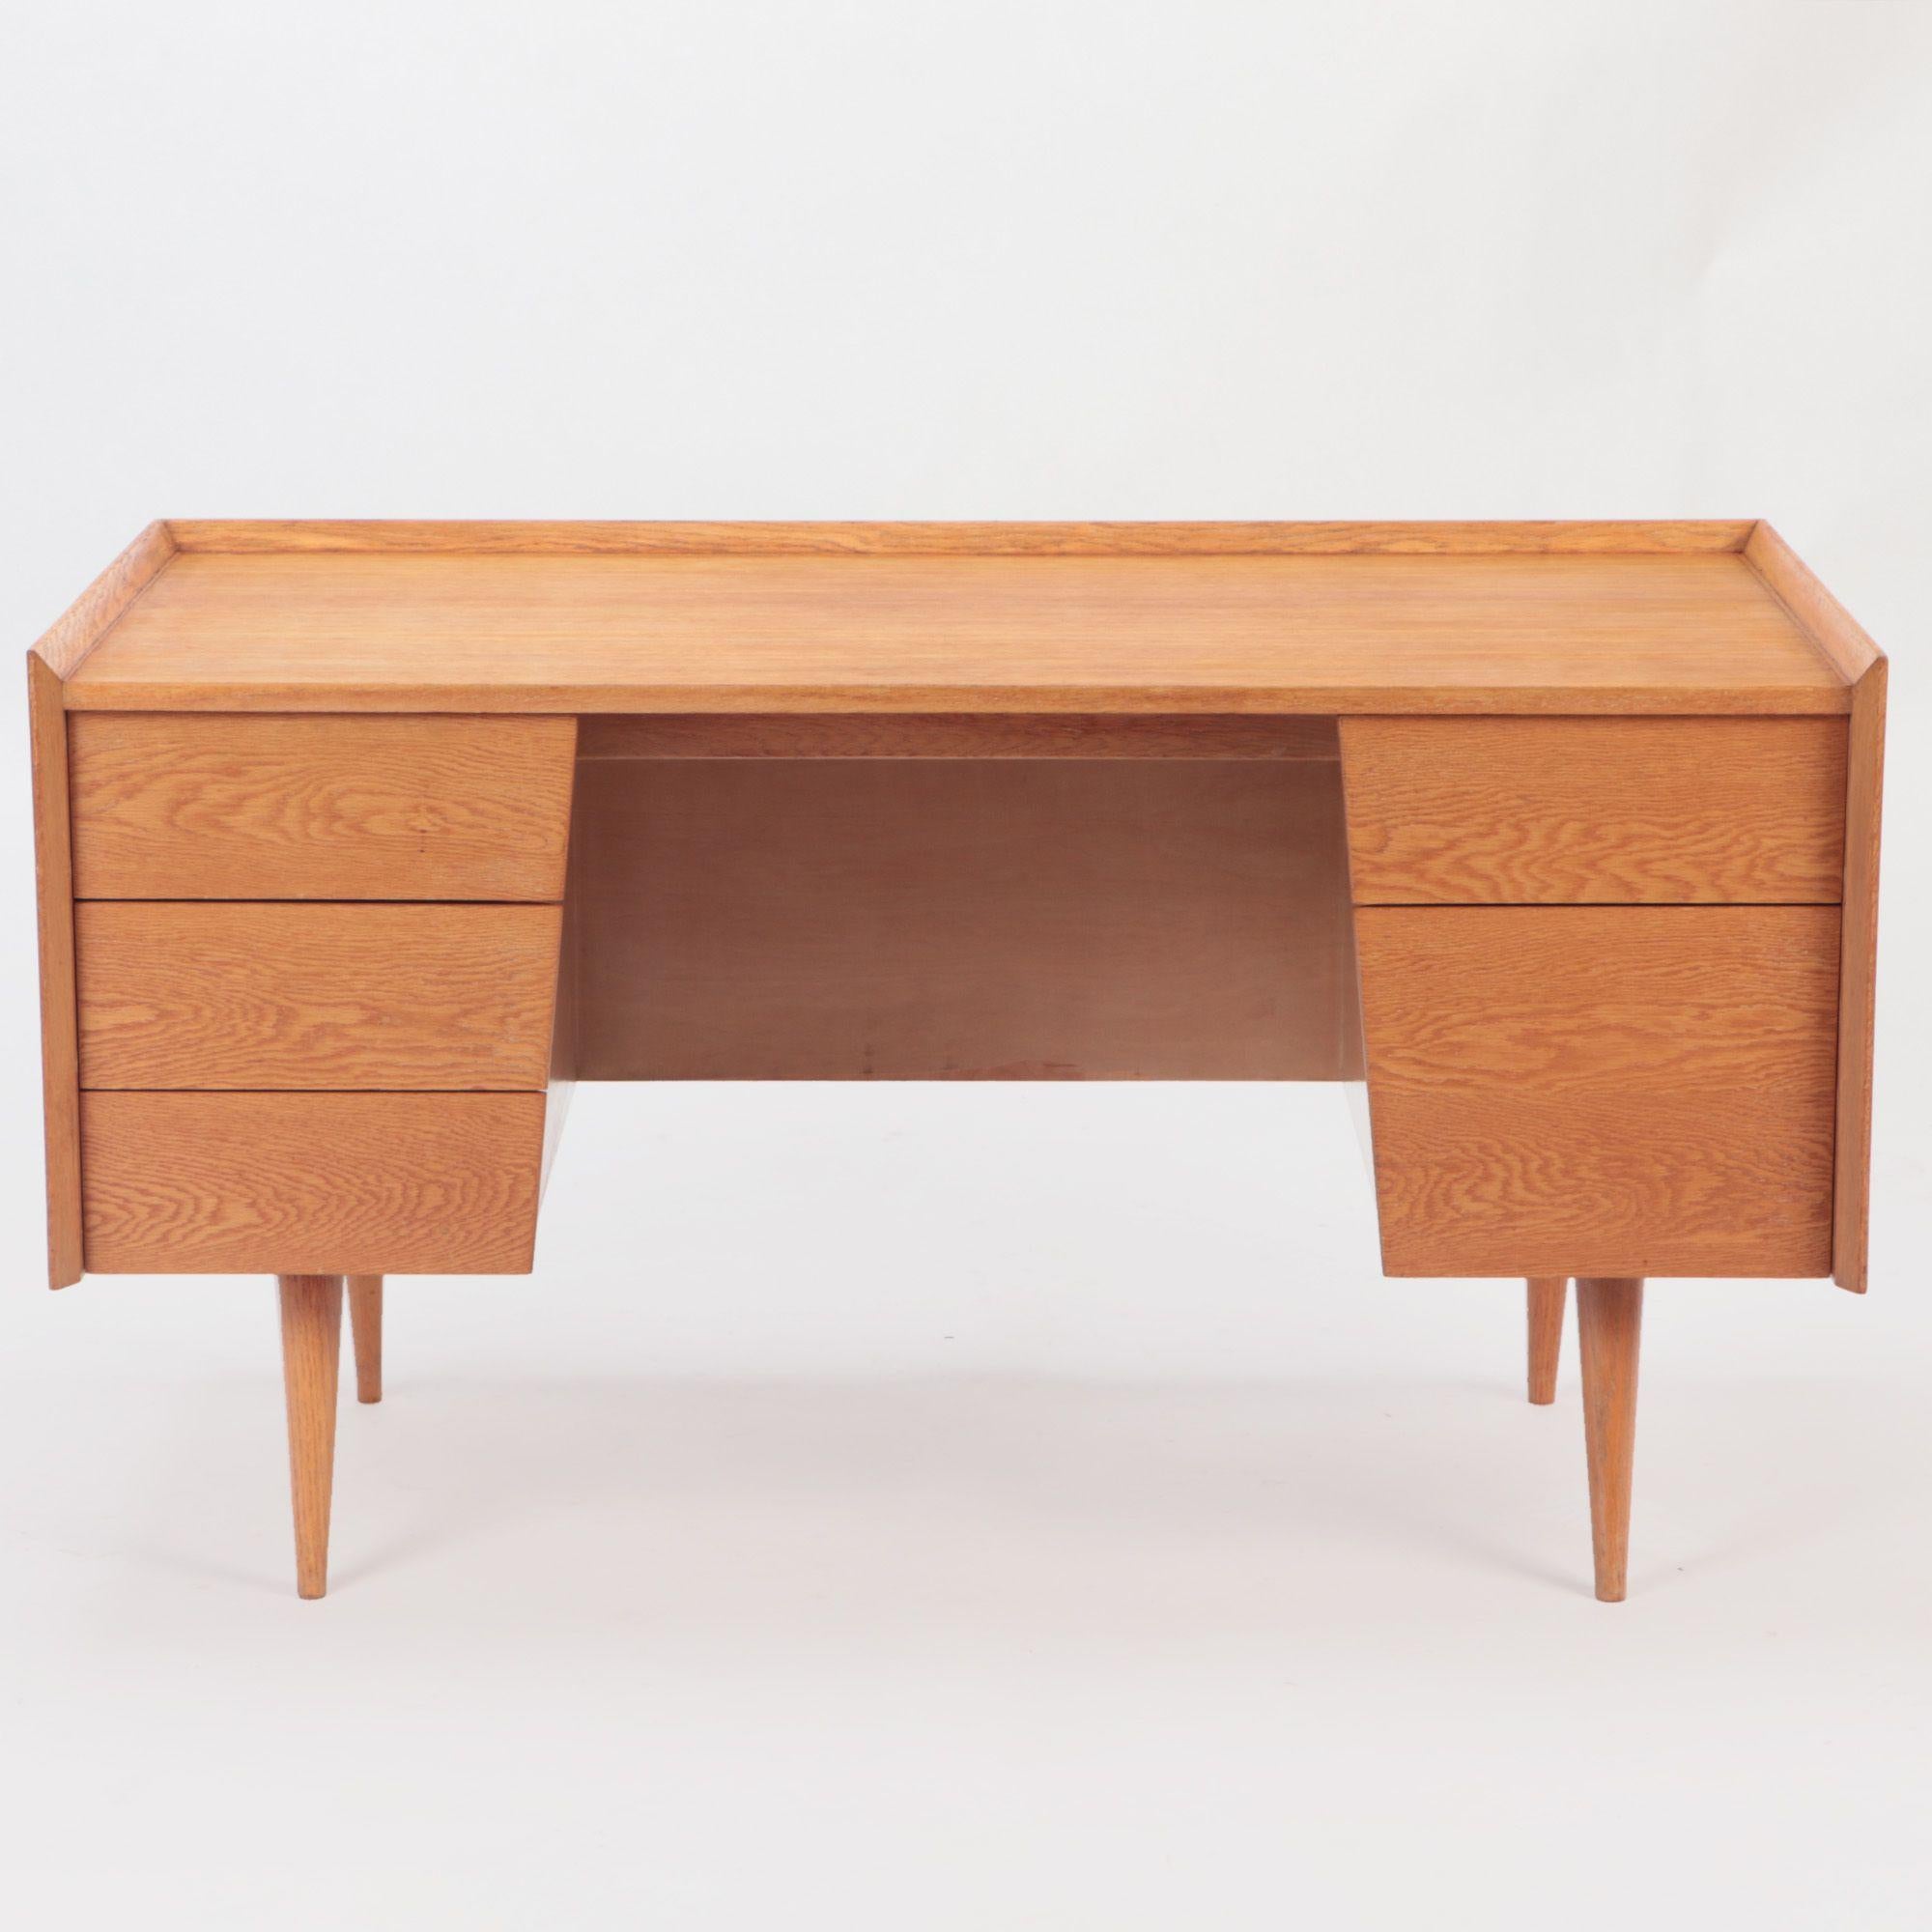 A rare and early white oak Mid-Century Modern five drawer desk labeled Risom Design circa 1950. Possibly from the early Risom NYC workshop.